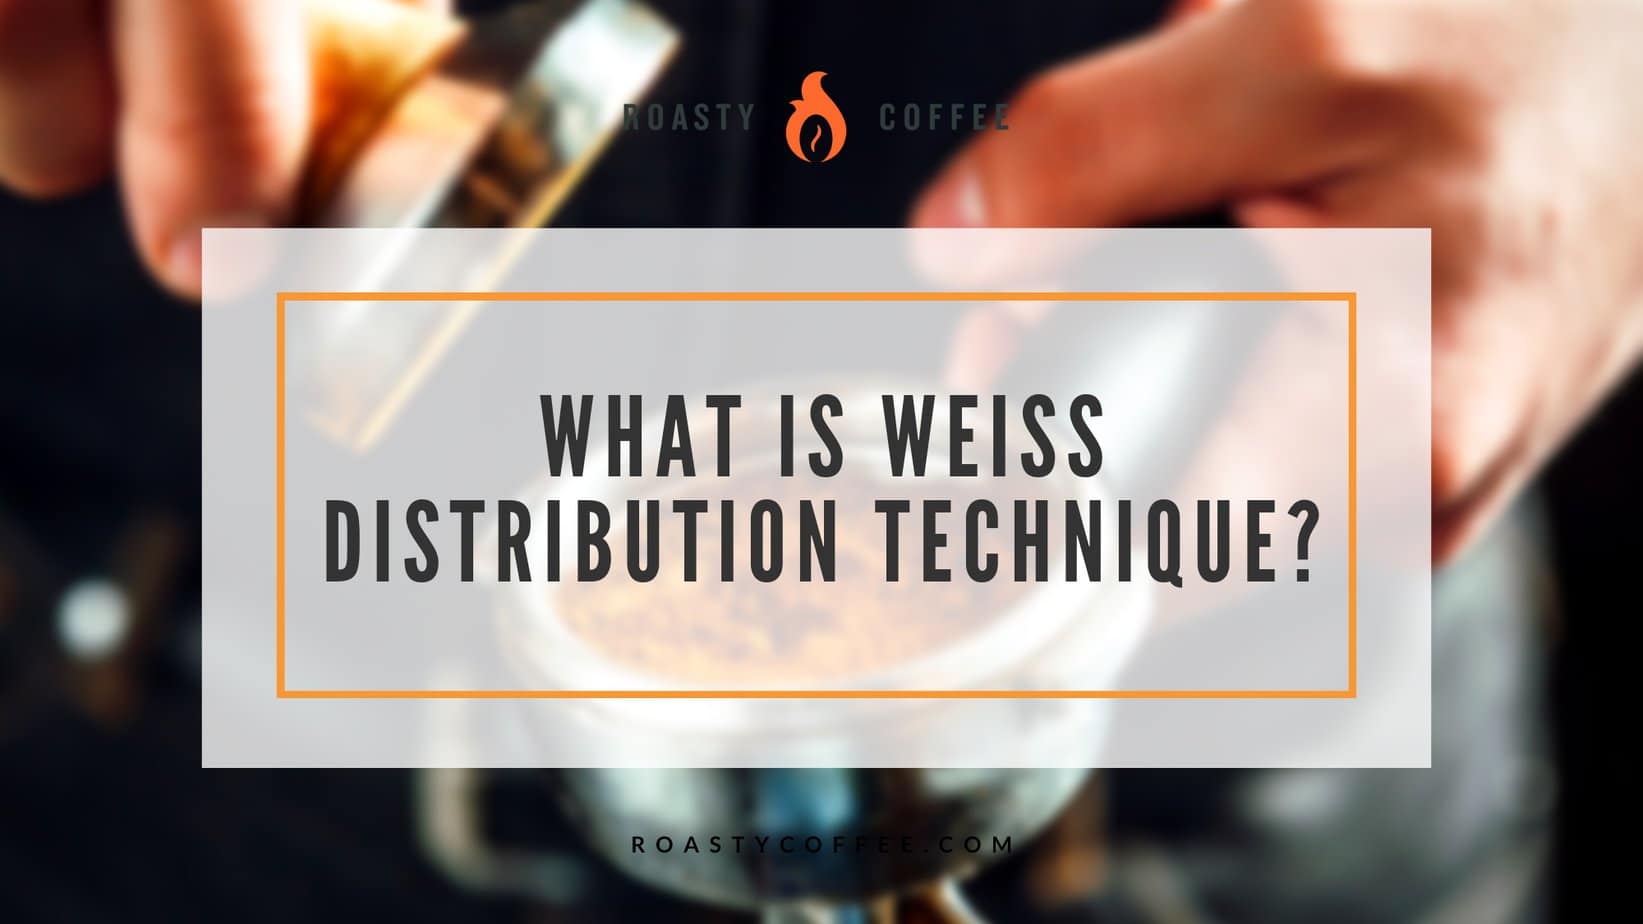 What Is weiss distribution technique